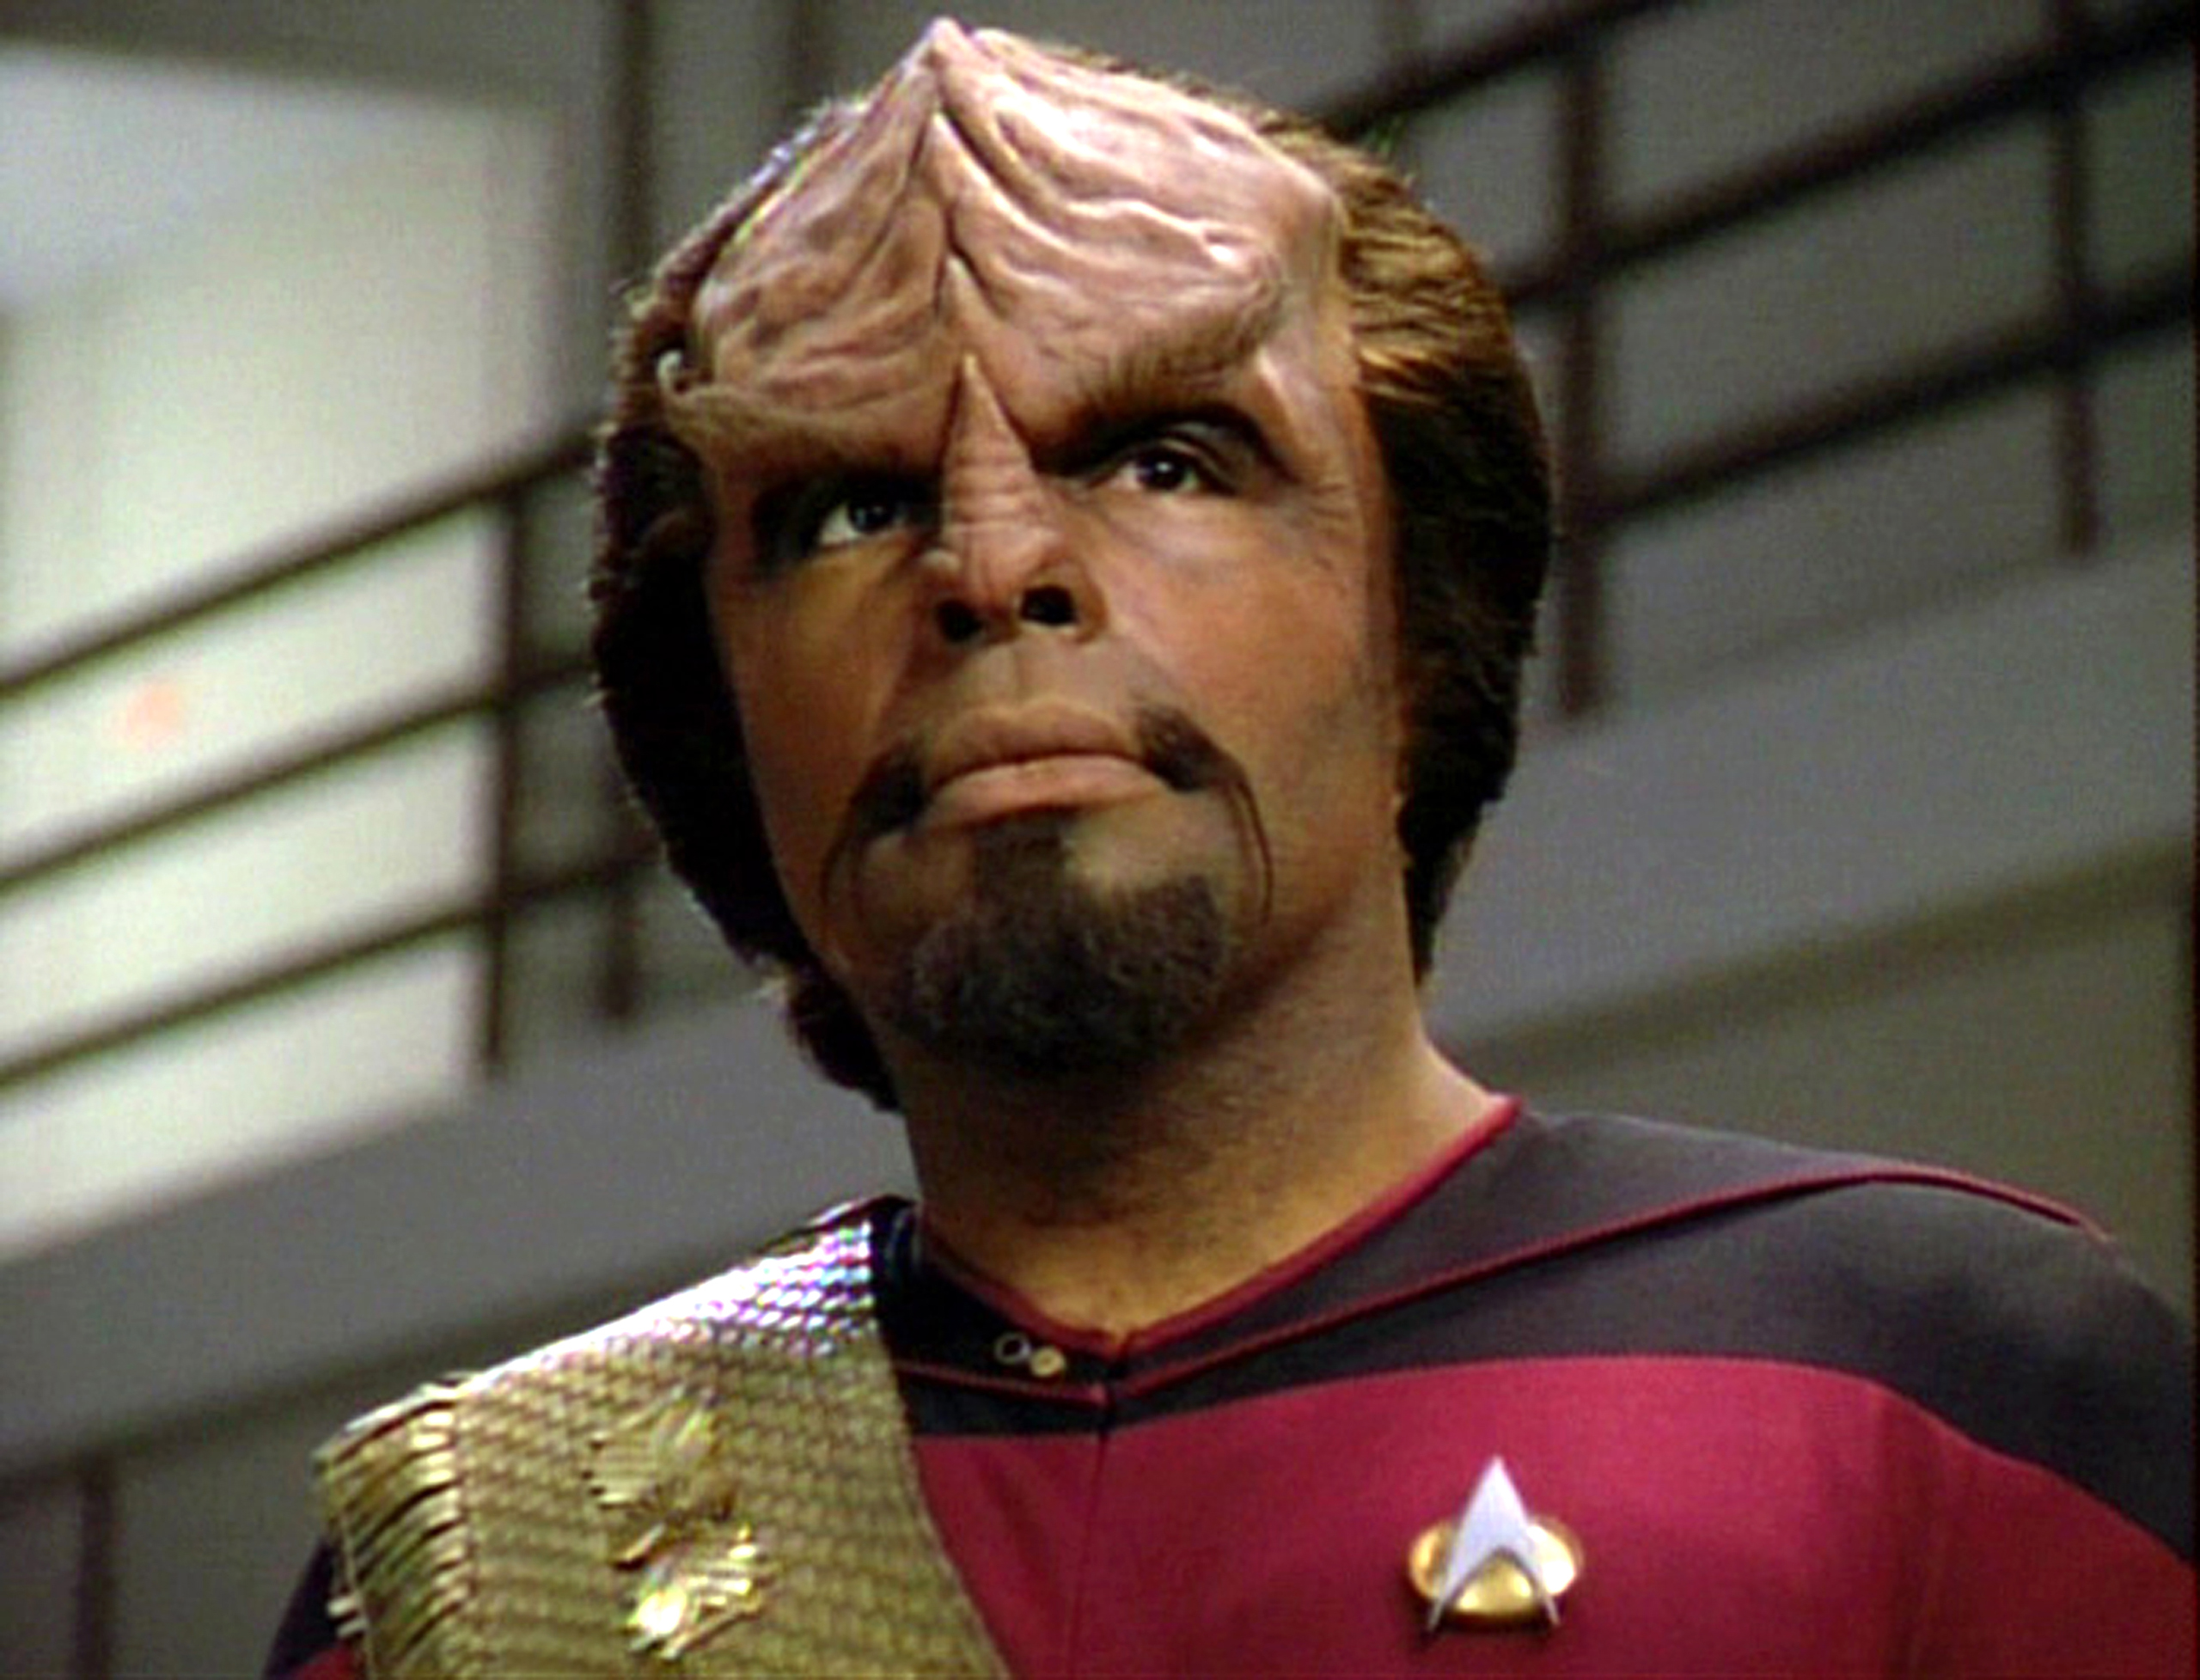 Michael Dorn as Lieutenant Worf in Star Trek: The Next Generation, May 23, 1994. (CBS/Getty Images)